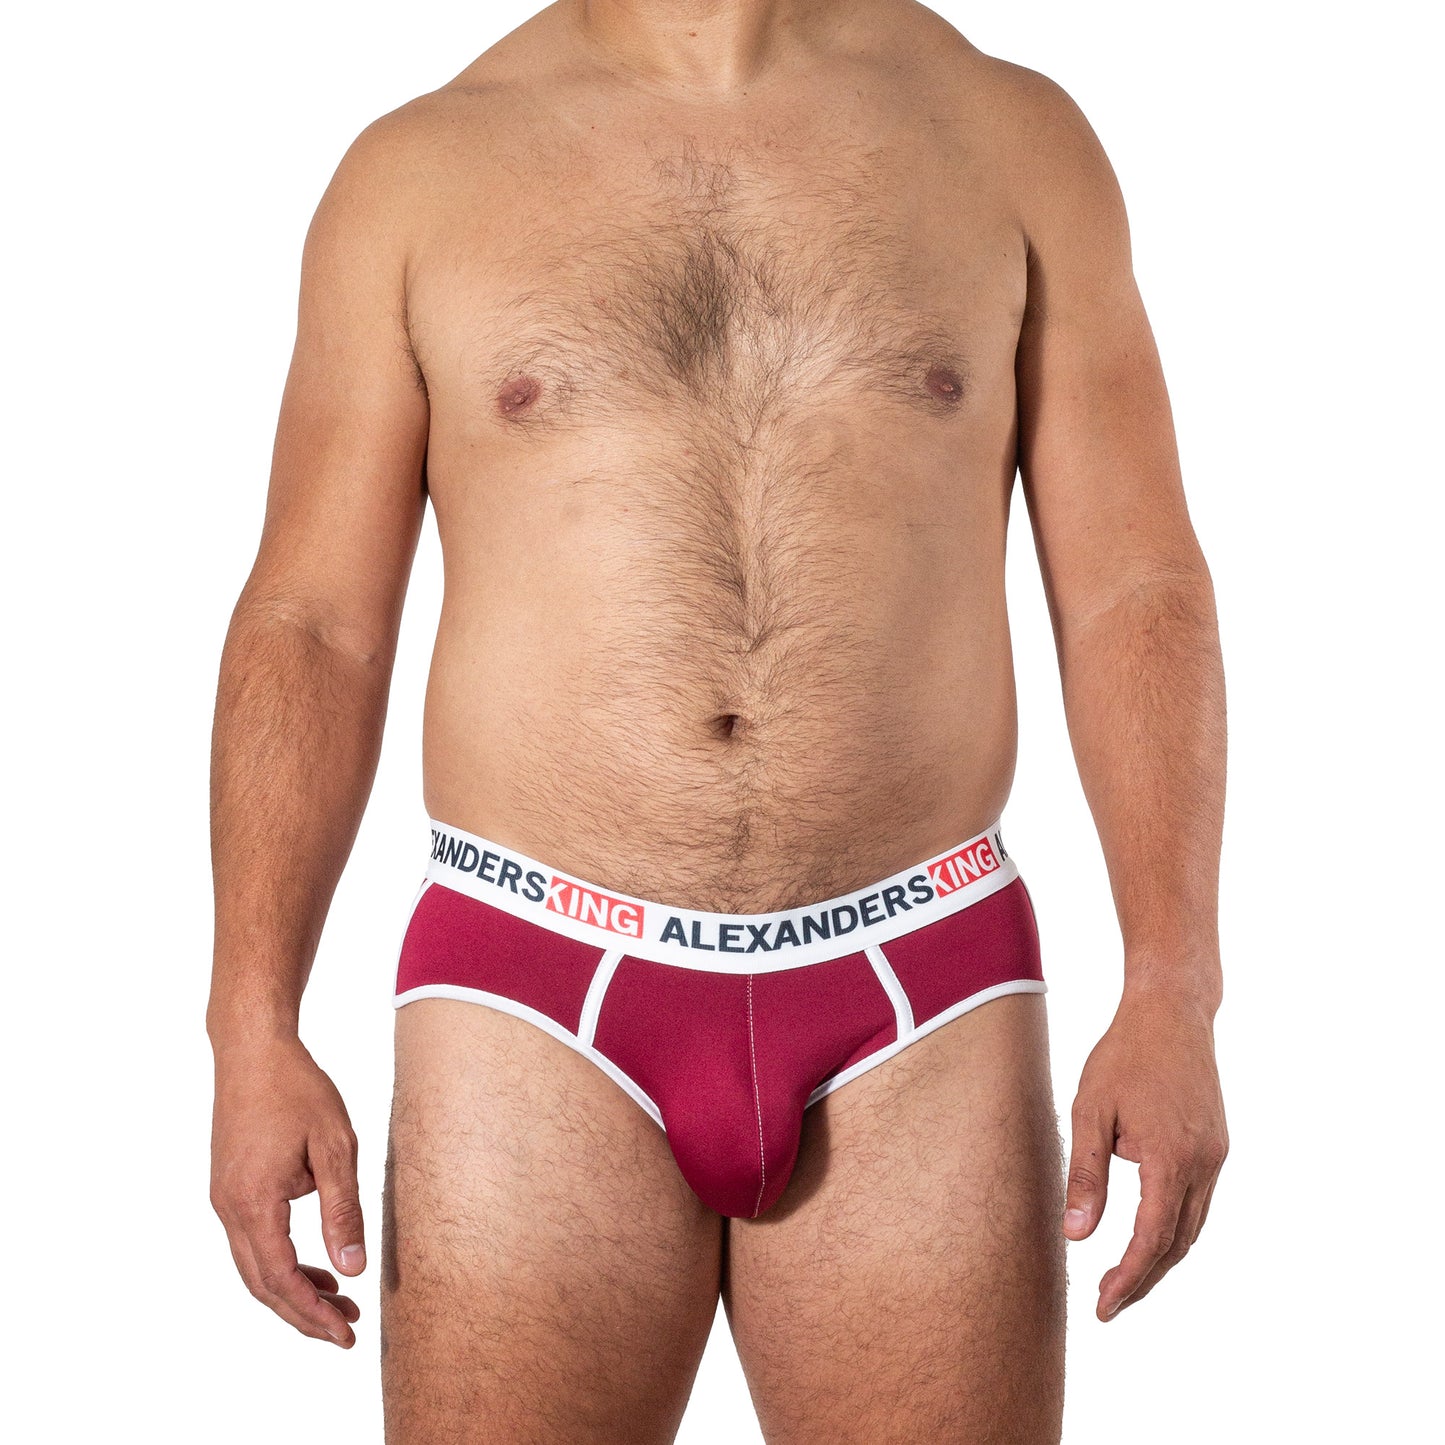 TP0333 Brief tinto Skinit Alexanders King